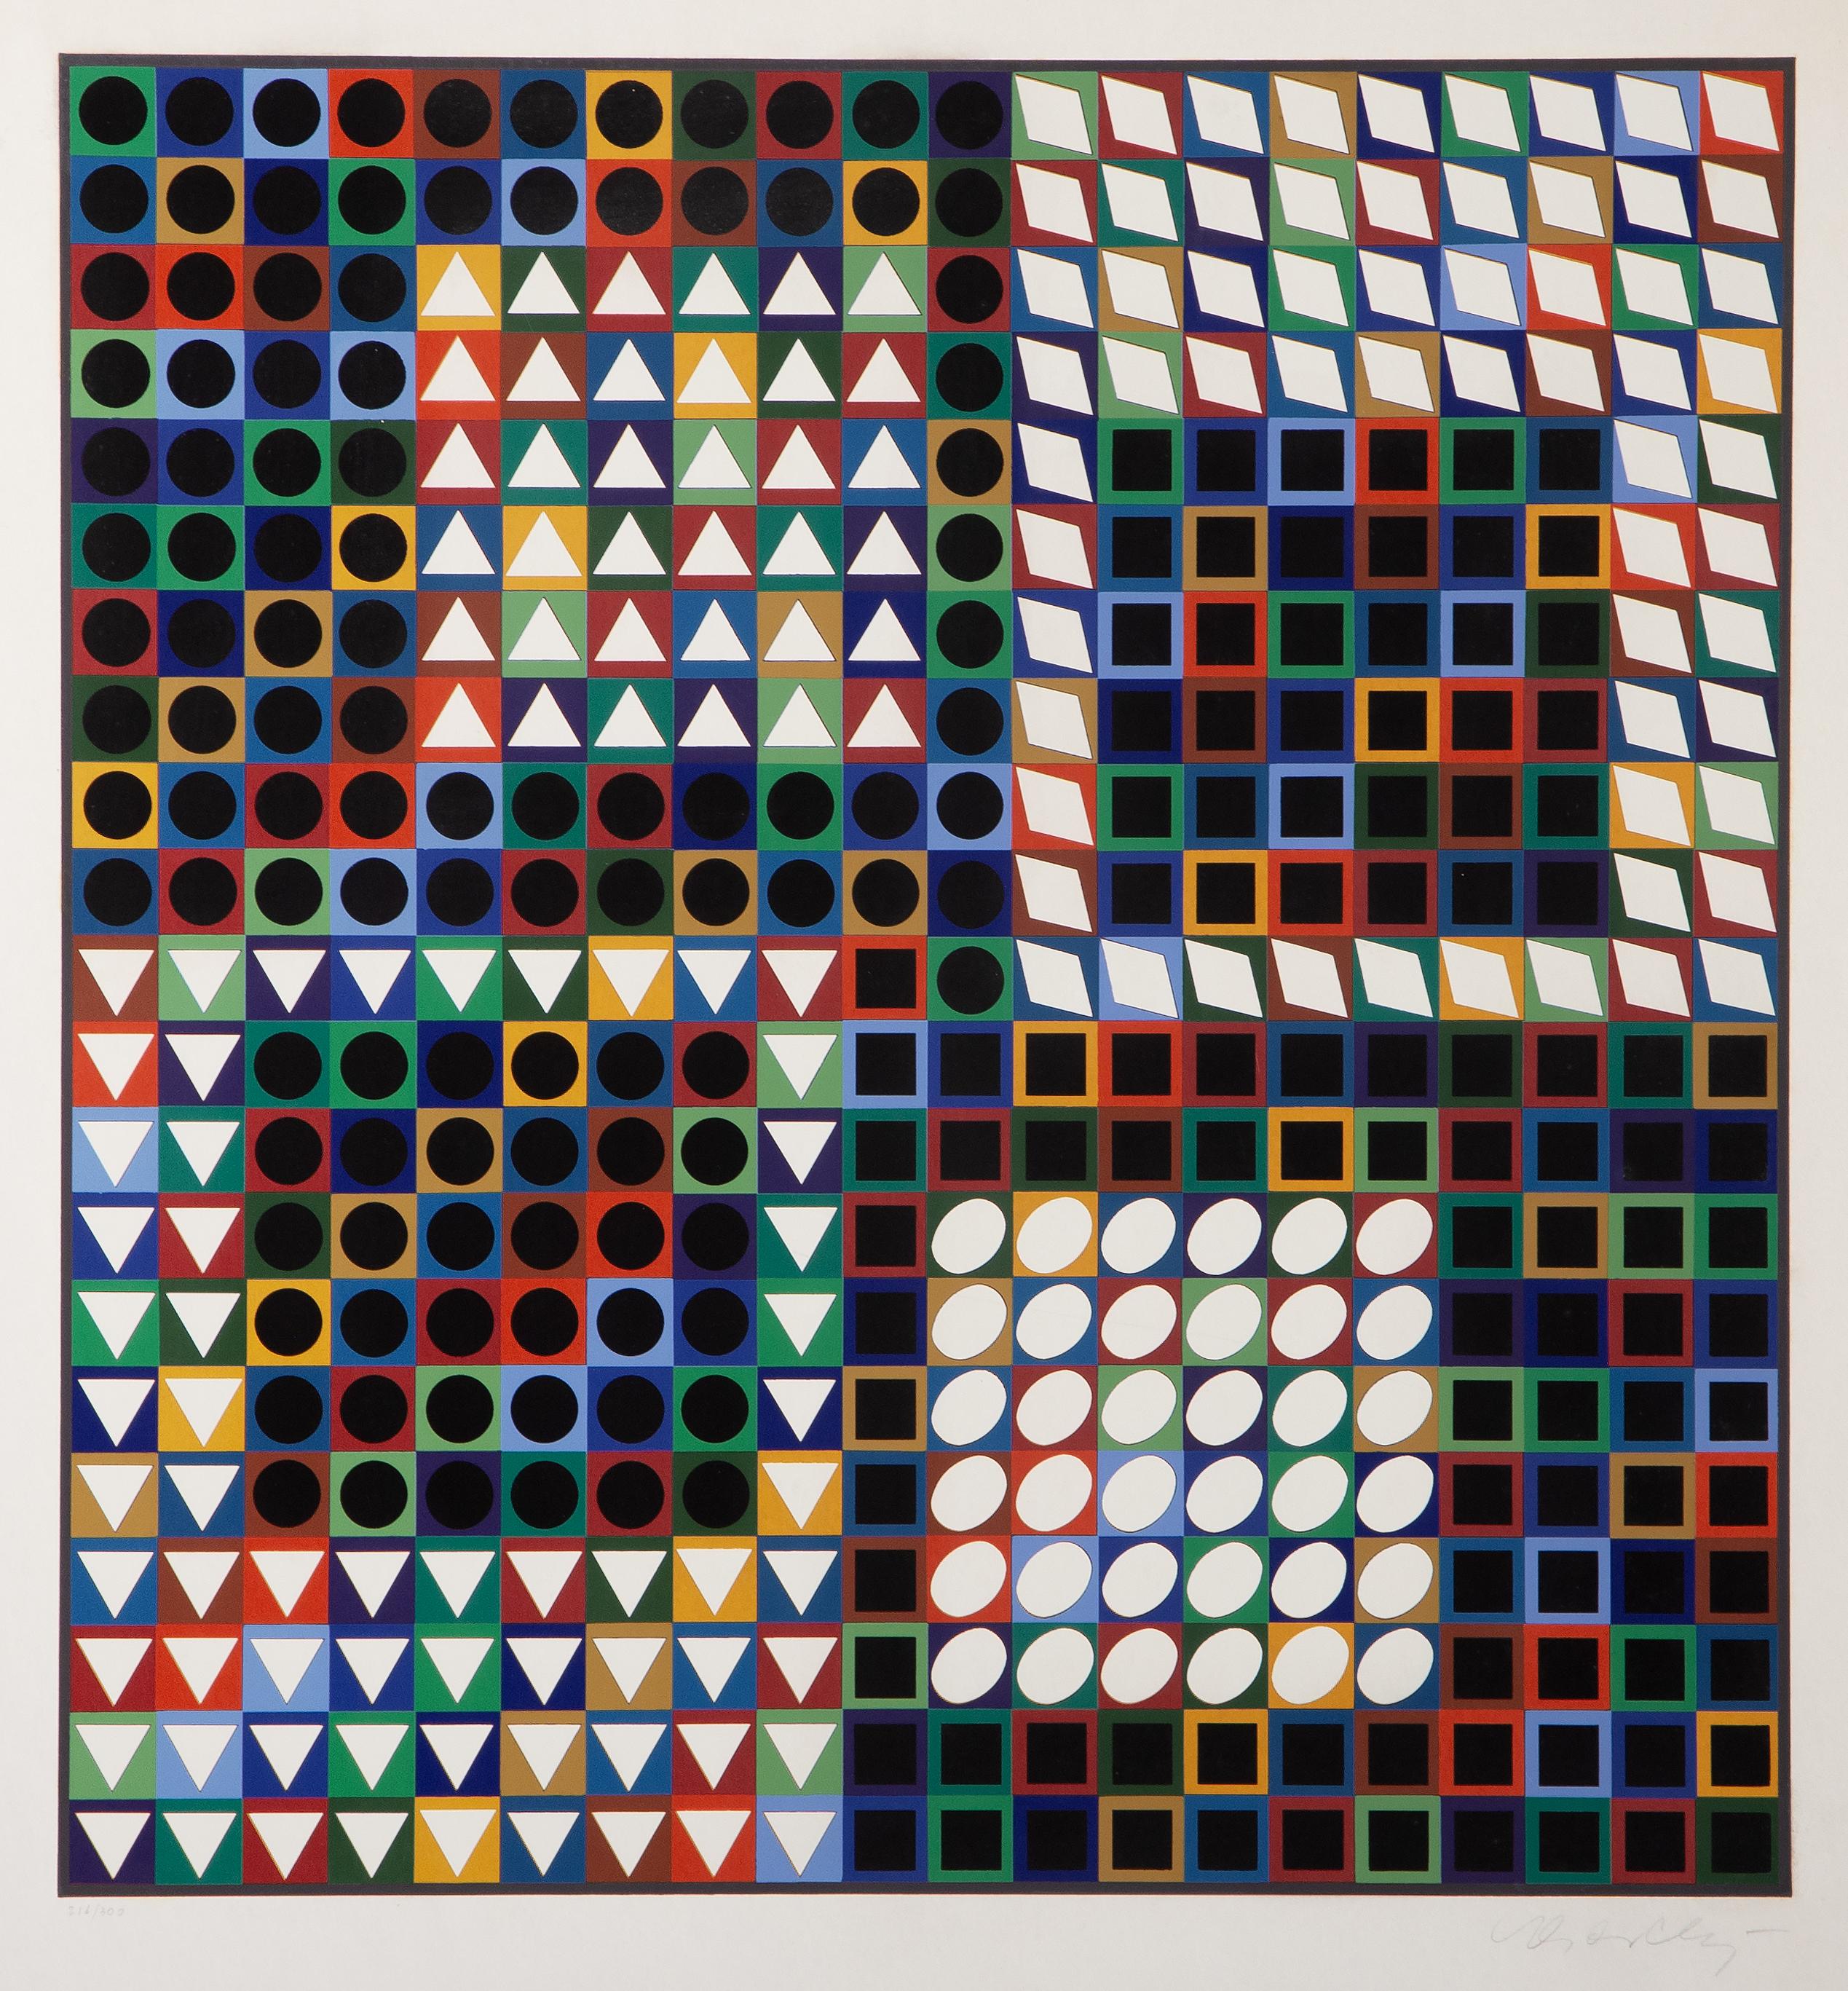 What type of art did Victor Vasarely do?